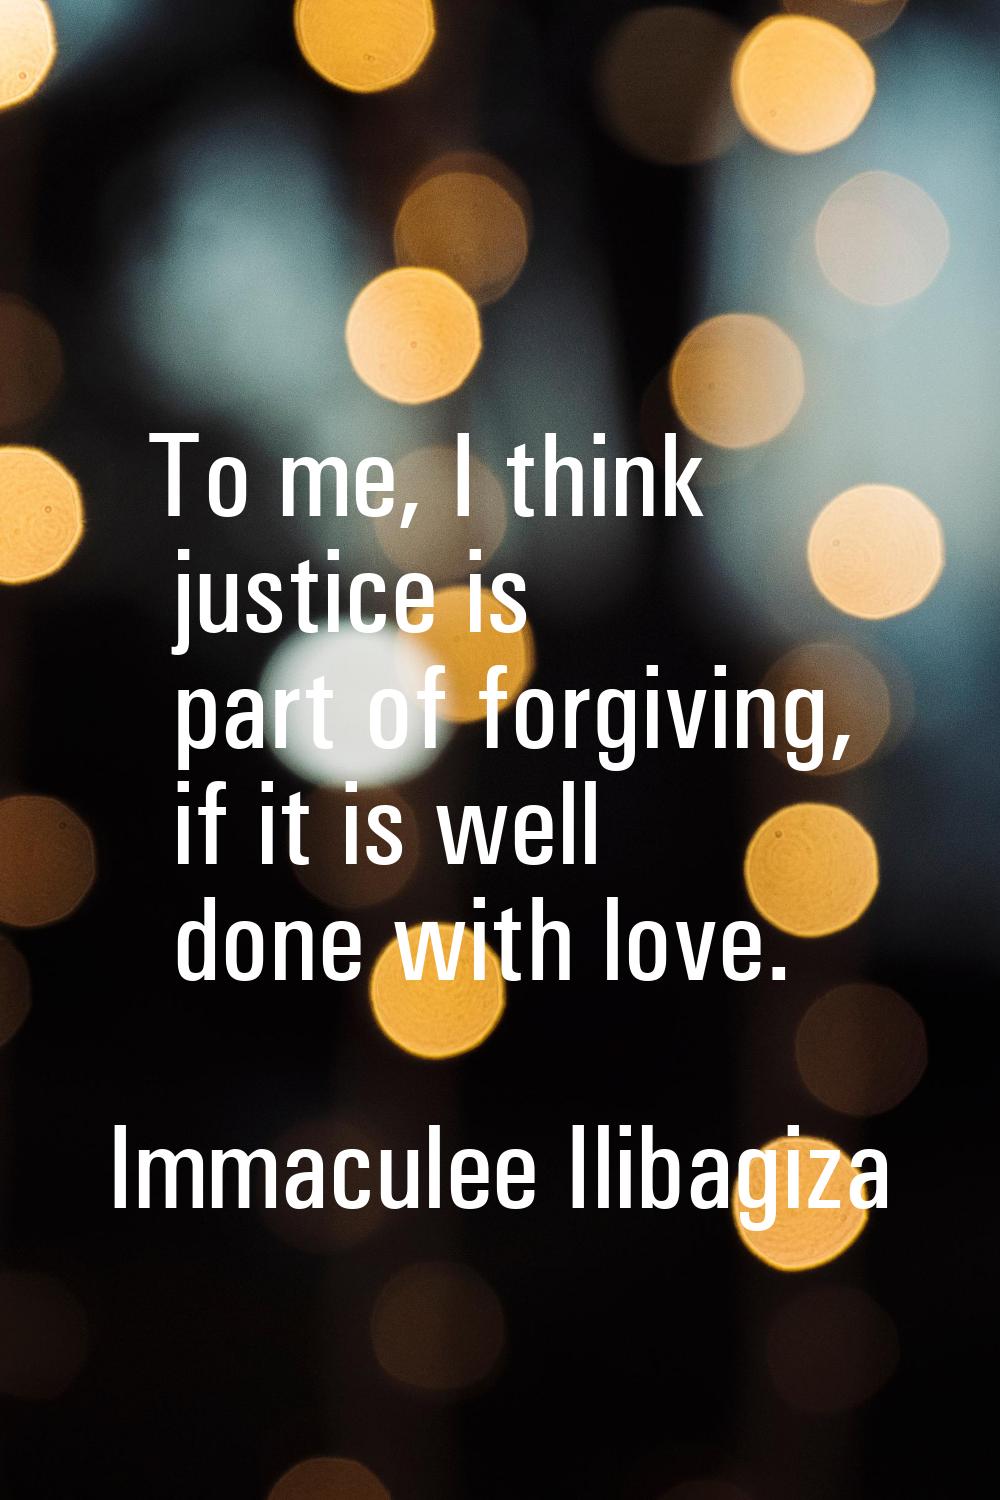 To me, I think justice is part of forgiving, if it is well done with love.